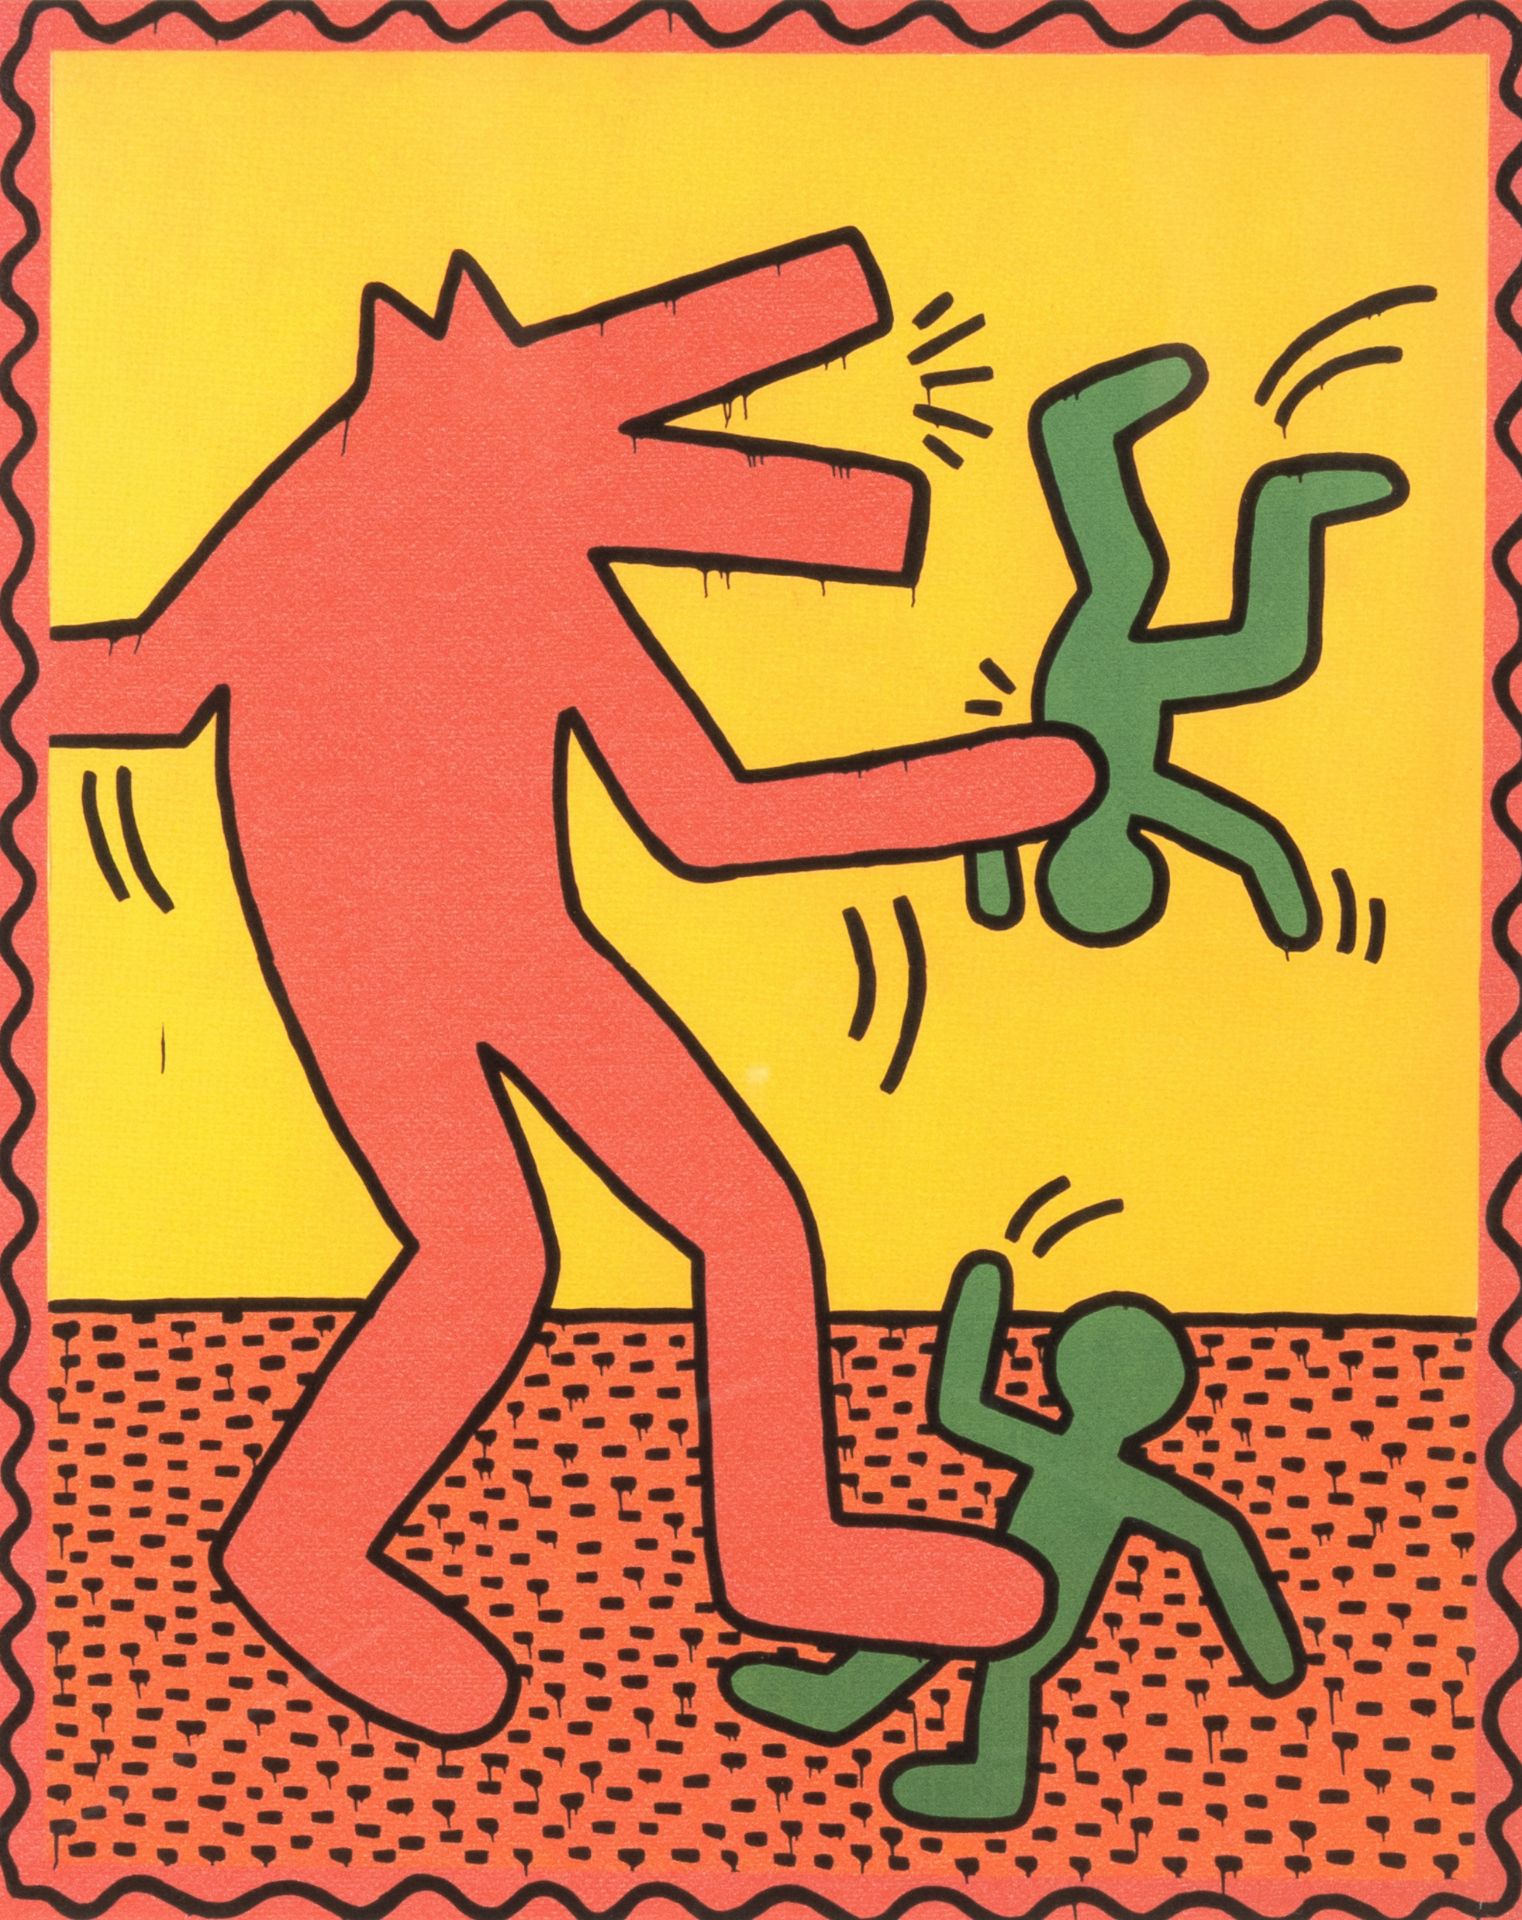 Keith Haring (1958-1990, after): 'Red dog', multiple, ed. 96/150